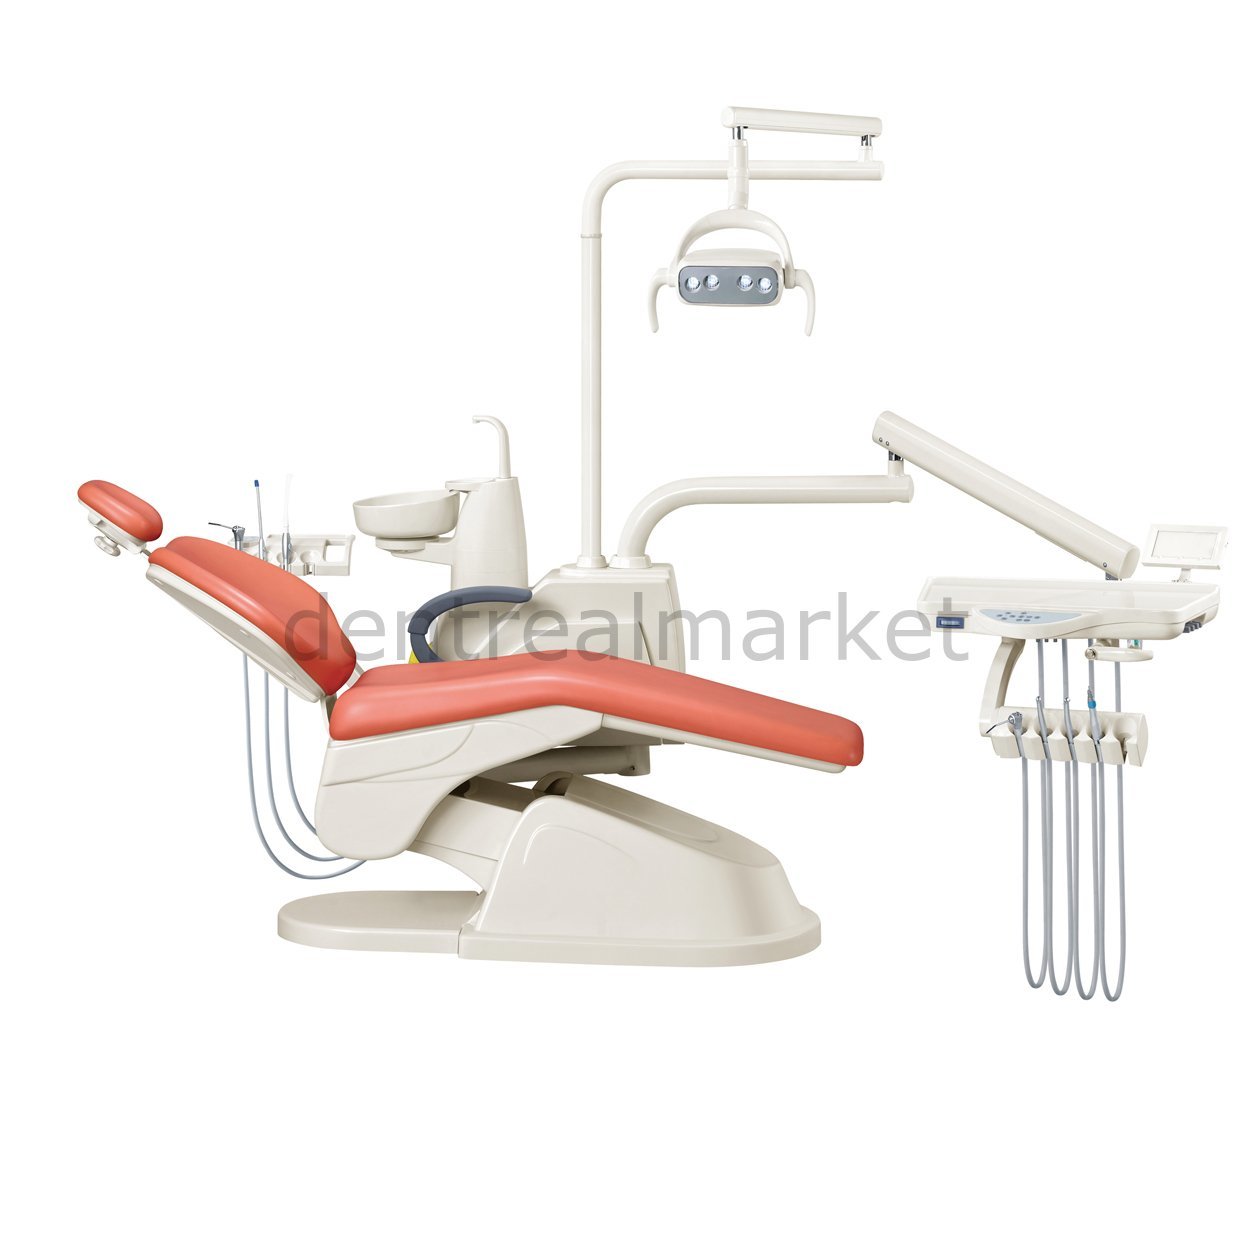 Dentreal Dental Unit With Chair